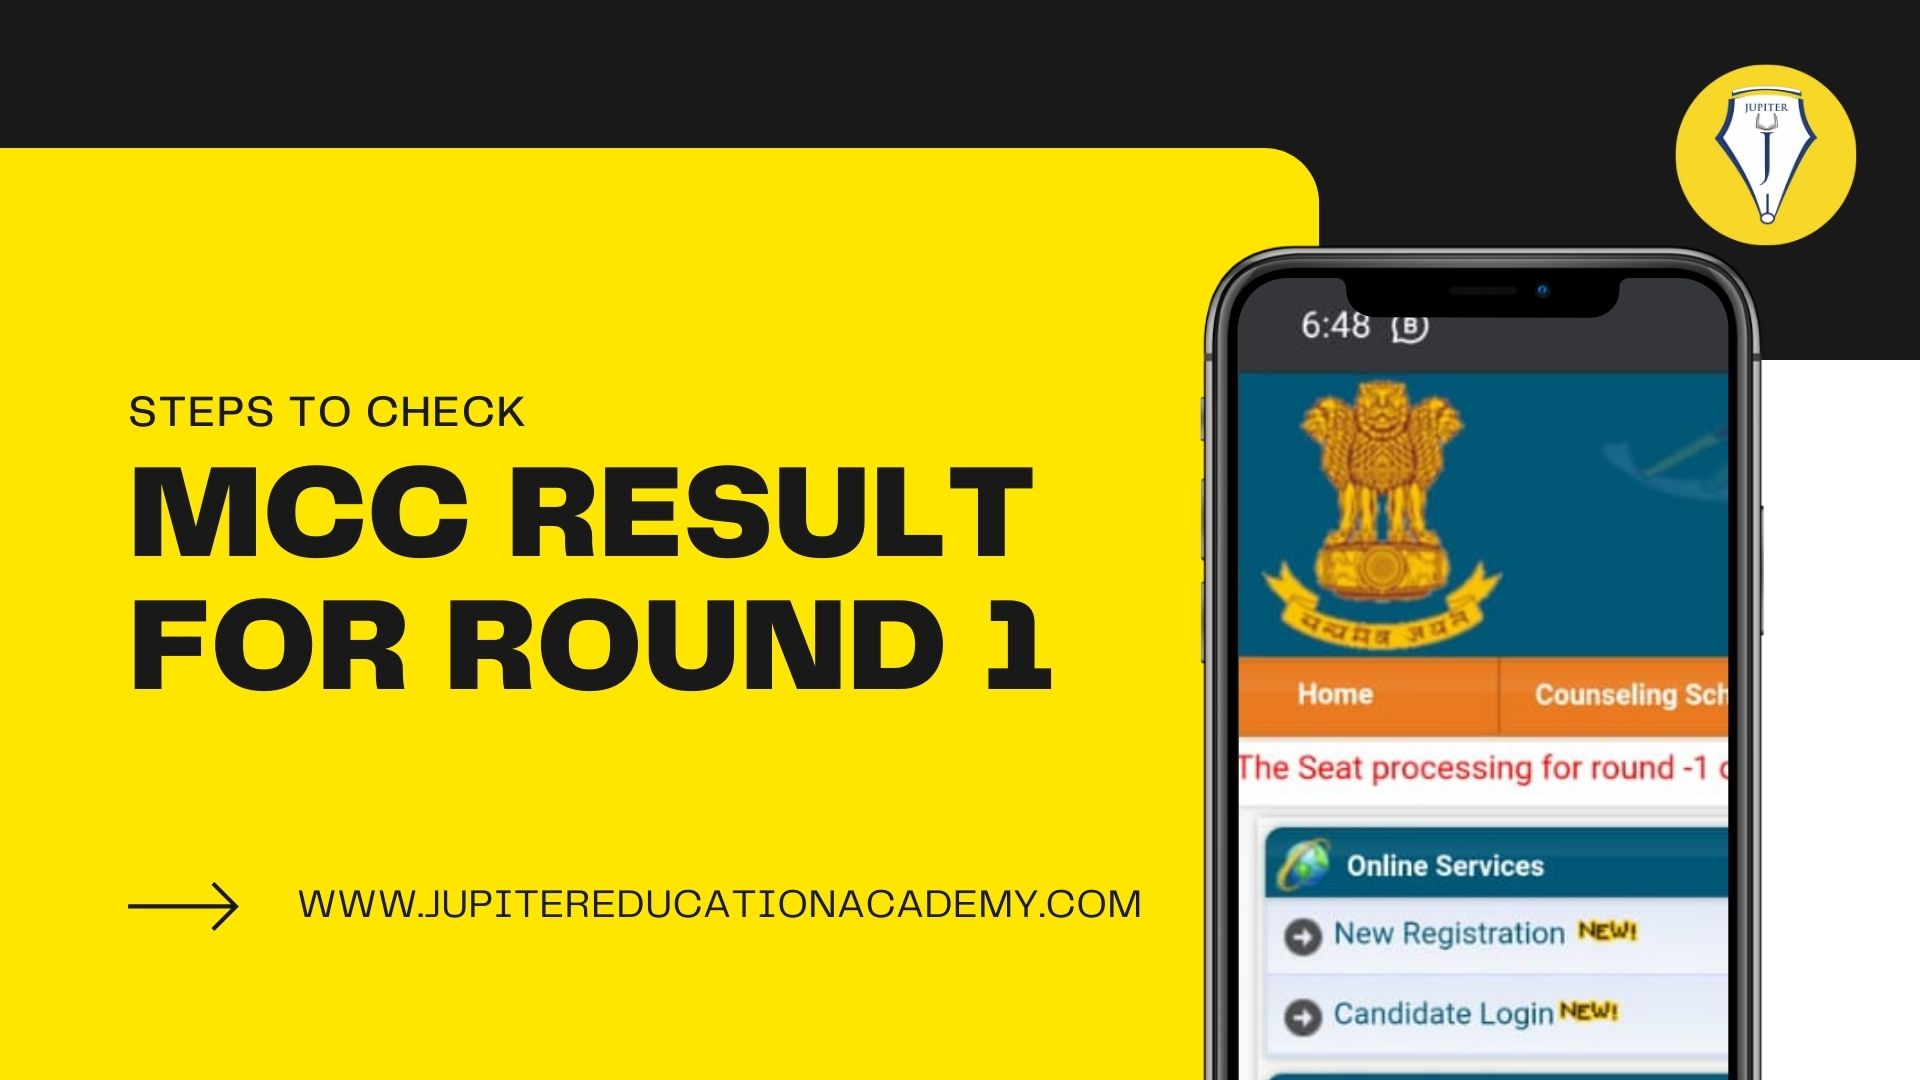 You are currently viewing Steps to Check MCC RESULT FOR ROUND 1